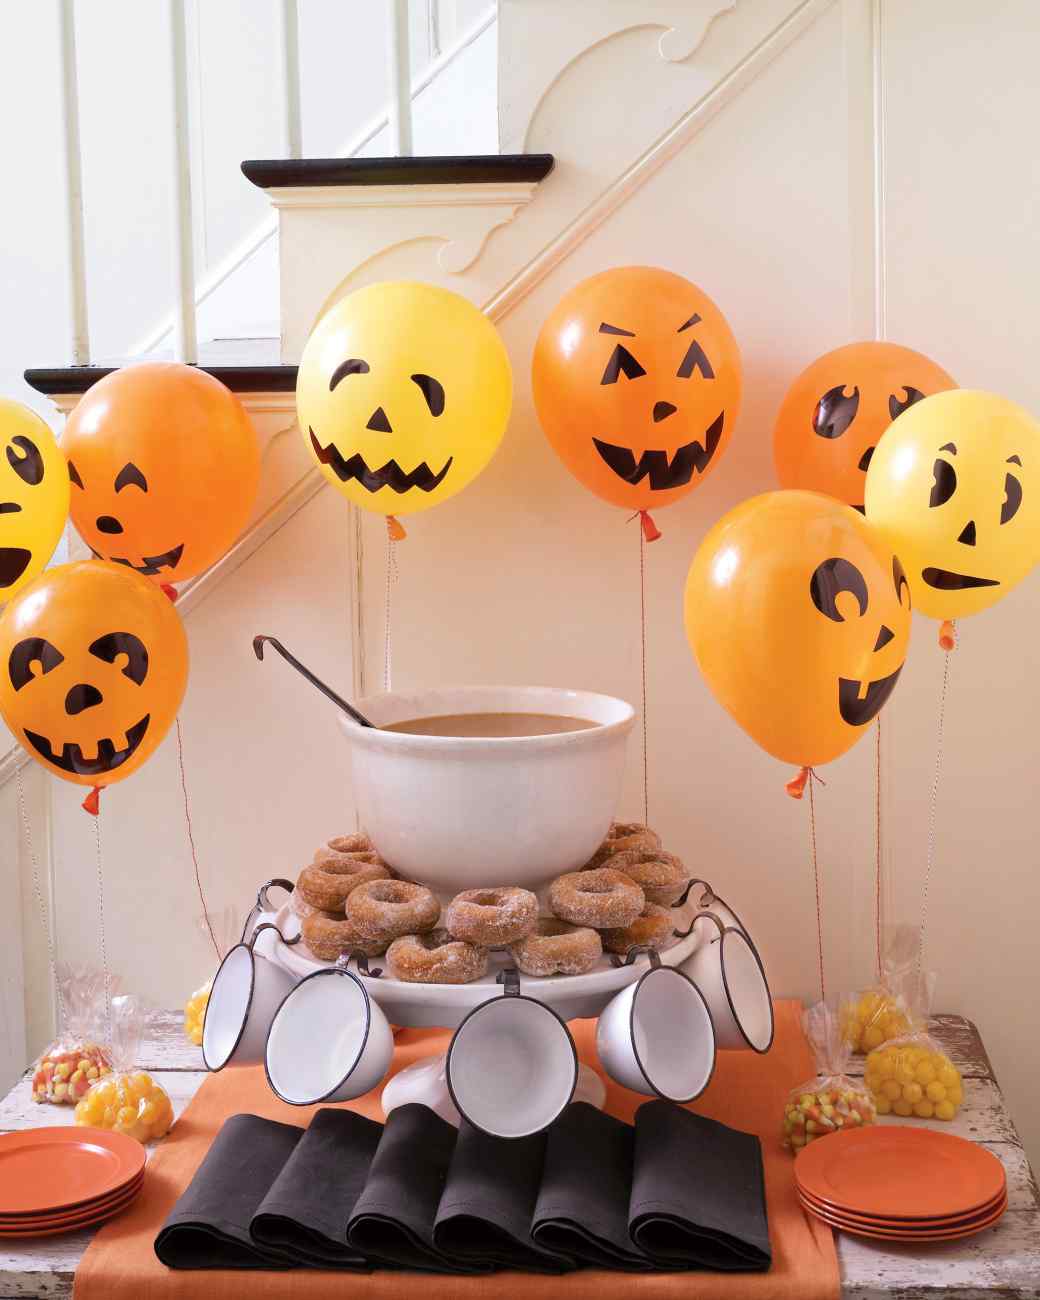 25 Halloween Decorations to Make at Home - Decoration Love